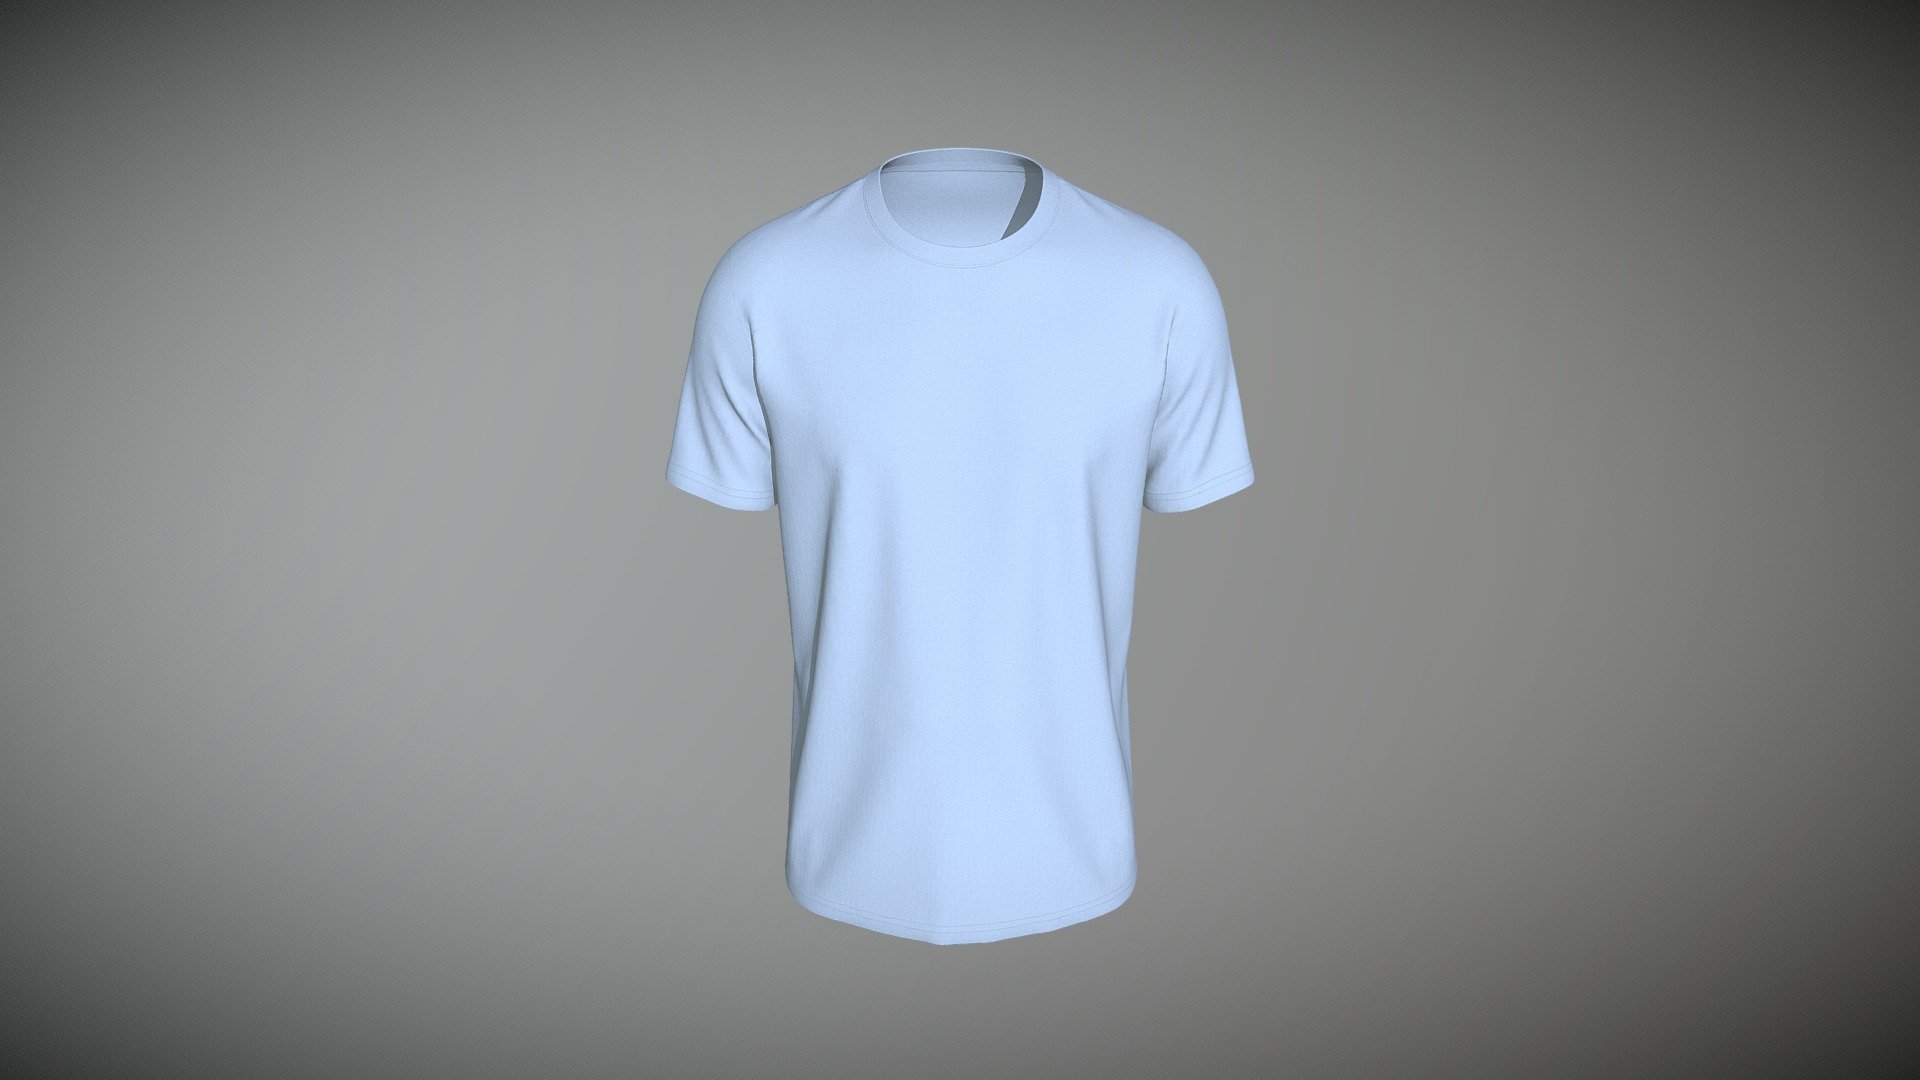 Cloth Title = Men's Loose-Fit Short-Sleeve Round Neck T-Shirt 

SKU = DG100044 

Category = Unisex 

Product Type = T-Shirt 

Cloth Length = Regular 

Body Fit = Loose Fit 

Occasion = Casual  

Sleeve Style = Set In Sleeve 


Our Services:

3D Apparel Design.

OBJ,FBX,GLTF Making with High/Low Poly.

Fabric Digitalization.

Mockup making.

3D Teck Pack.

Pattern Making.

2D Illustration.

Cloth Animation and 360 Spin Video.


Contact us:- 

Email: info@digitalfashionwear.com 

Website: https://digitalfashionwear.com 


We designed all the types of cloth specially focused on product visualization, e-commerce, fitting, and production. 

We will design: 

T-shirts 

Polo shirts 

Hoodies 

Sweatshirt 

Jackets 

Shirts 

TankTops 

Trousers 

Bras 

Underwear 

Blazer 

Aprons 

Leggings 

and All Fashion items. 





Our goal is to make sure what we provide you, meets your demand 3d model